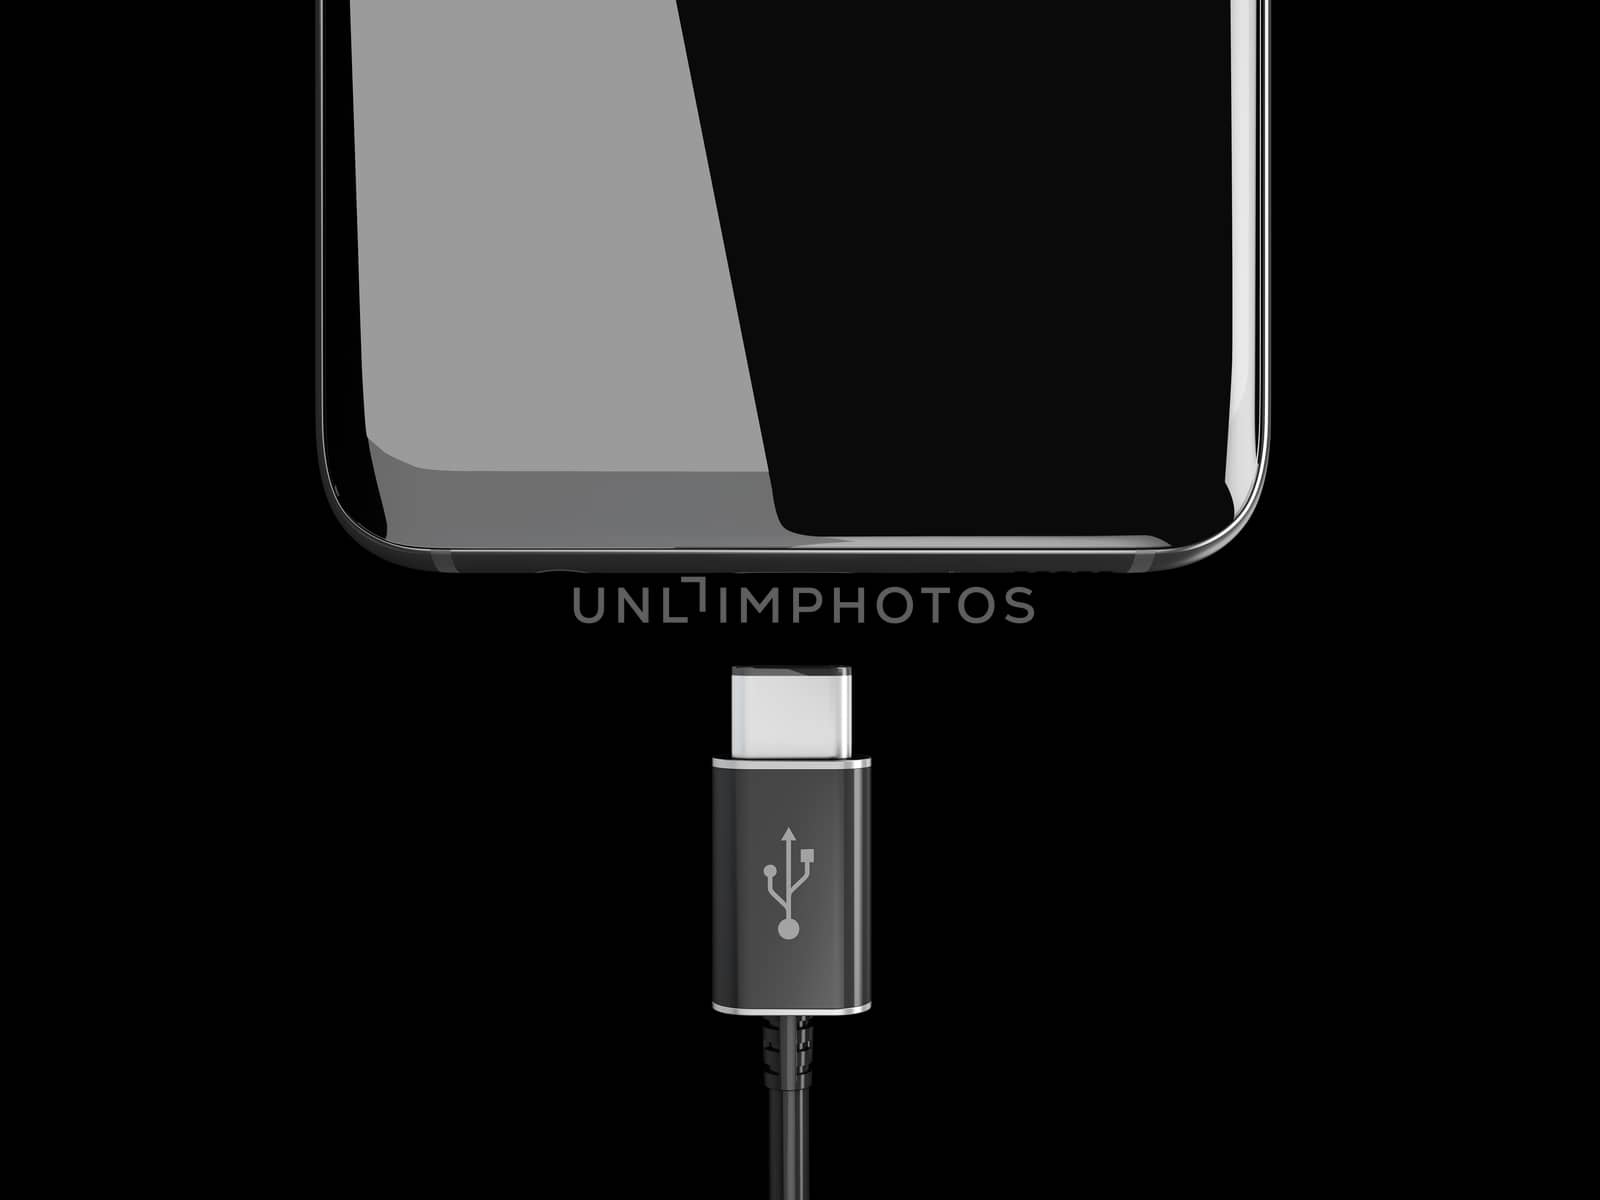 3d Illustration of USB cable for smartphone on black background